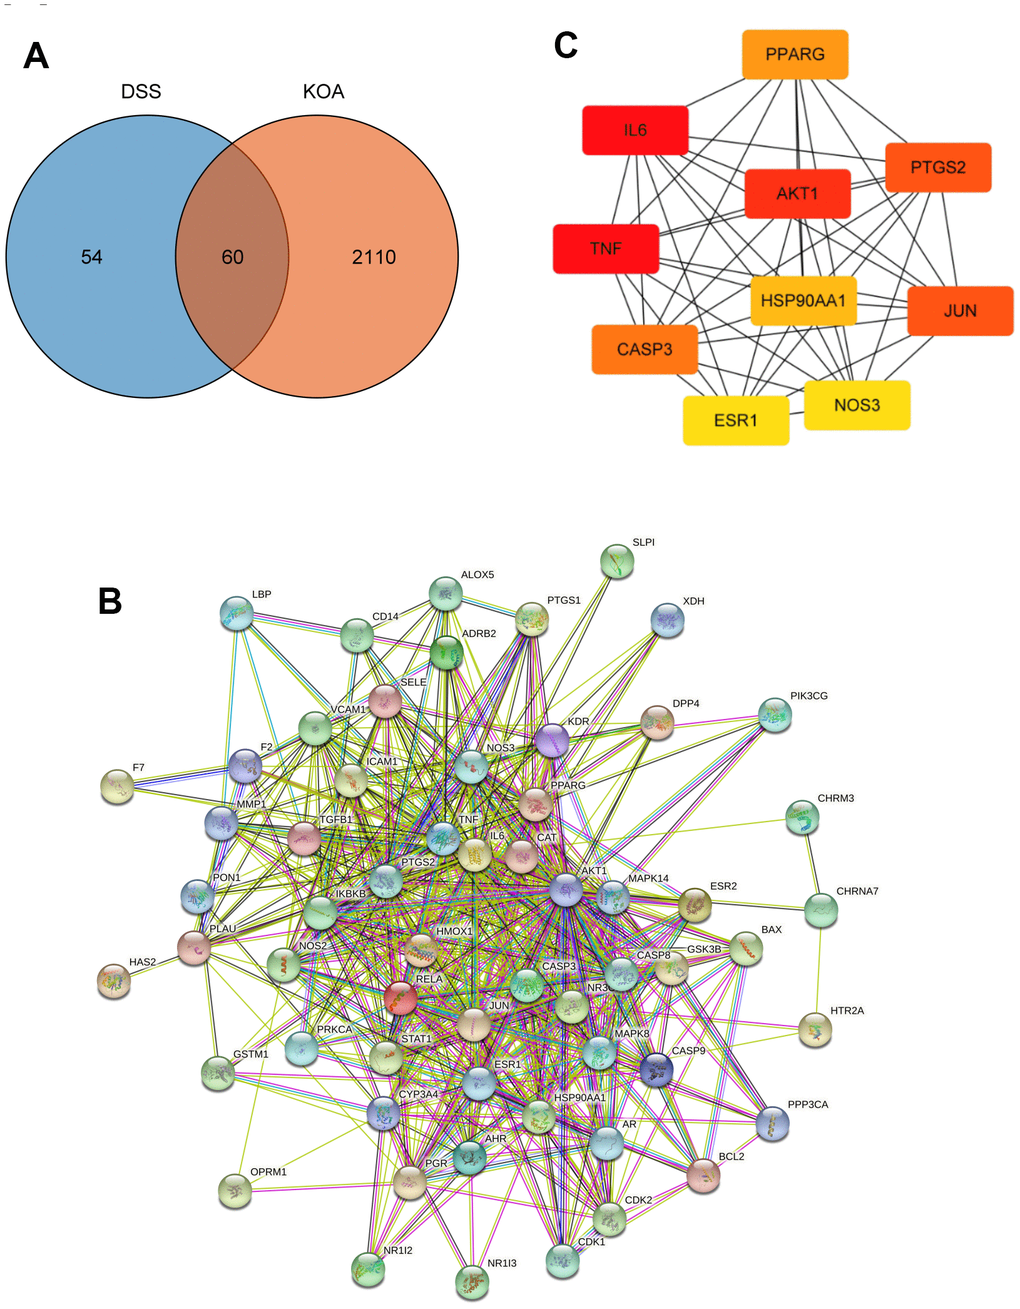 Network pharmacology analysis. (A) A Venn diagram was performed to obtain the candidate targets of the DSS and KOA. (B) PPI network of the candidate targets. (C) The top 10 hub genes ranked by degree.